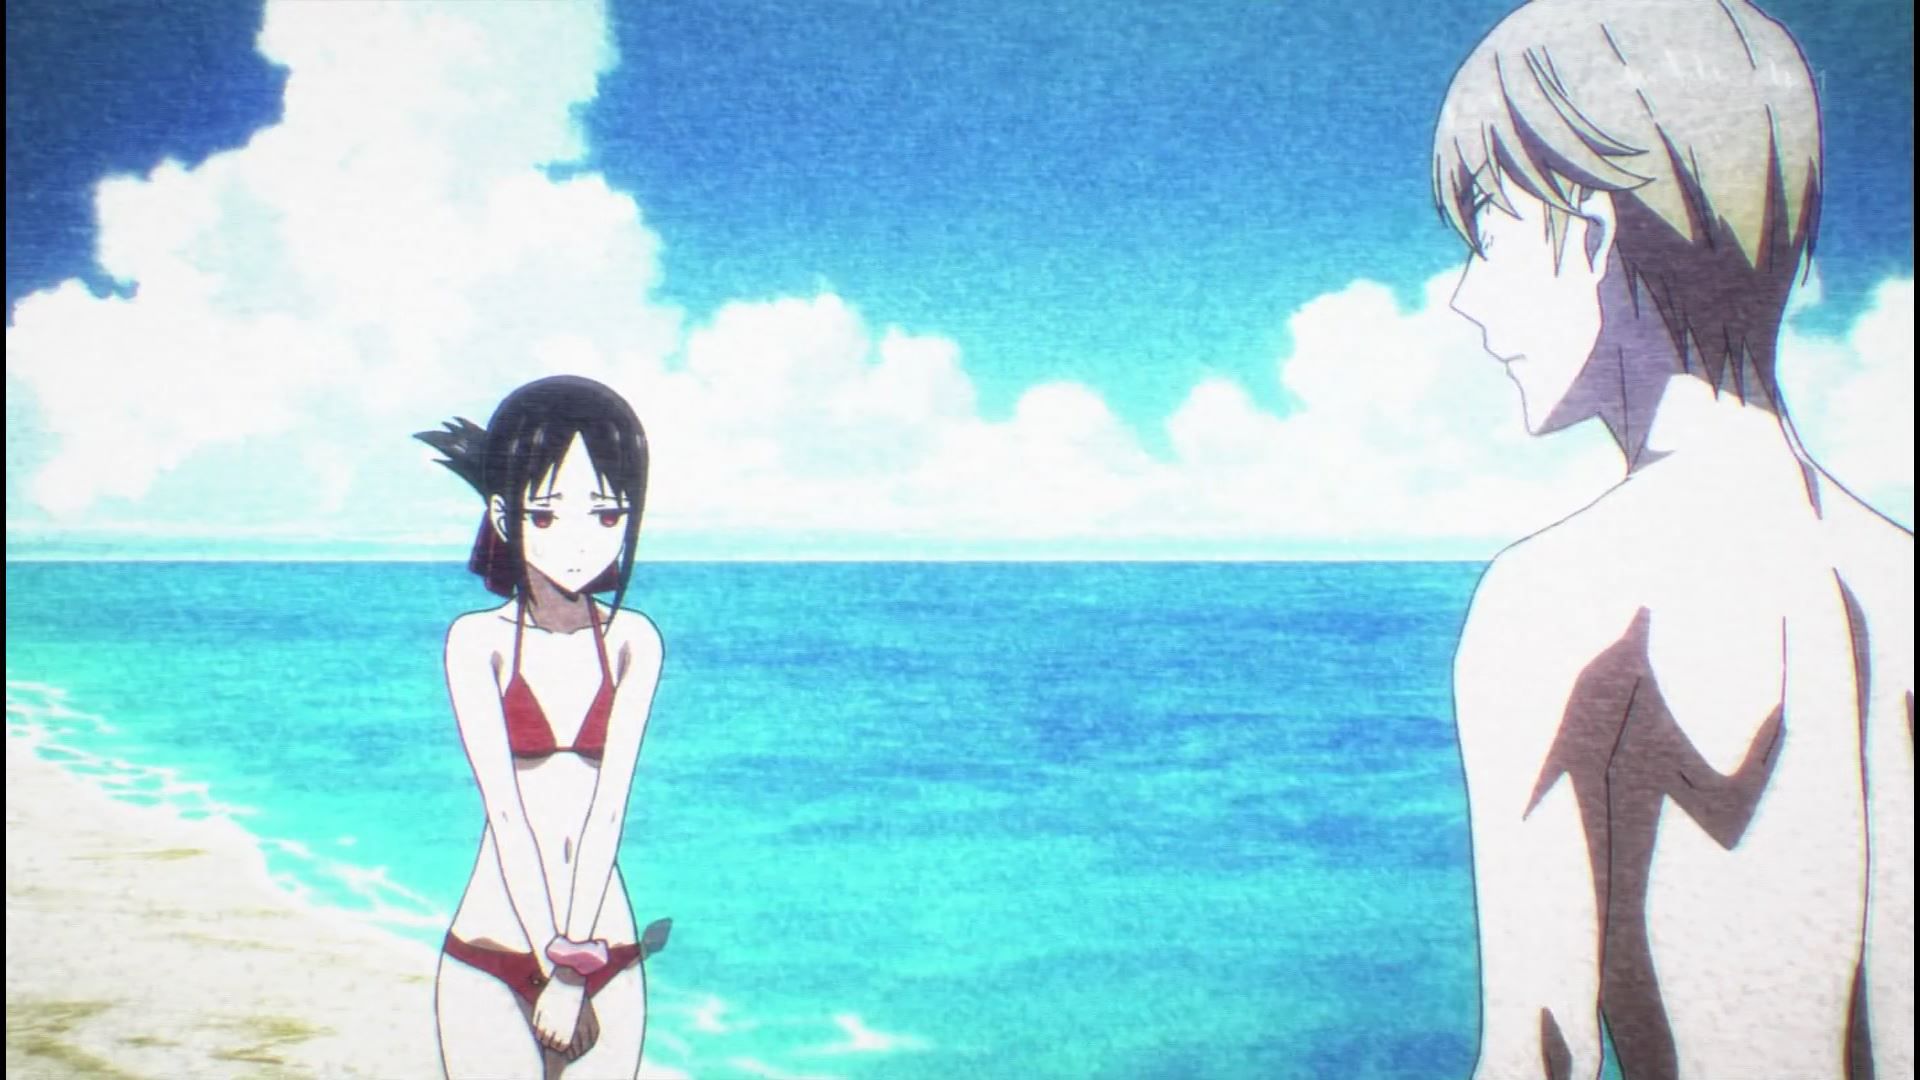 Anime [Kaguya want to be heard] 2 in the story of a girl erotic Pettanko swimsuit and breasts! 22